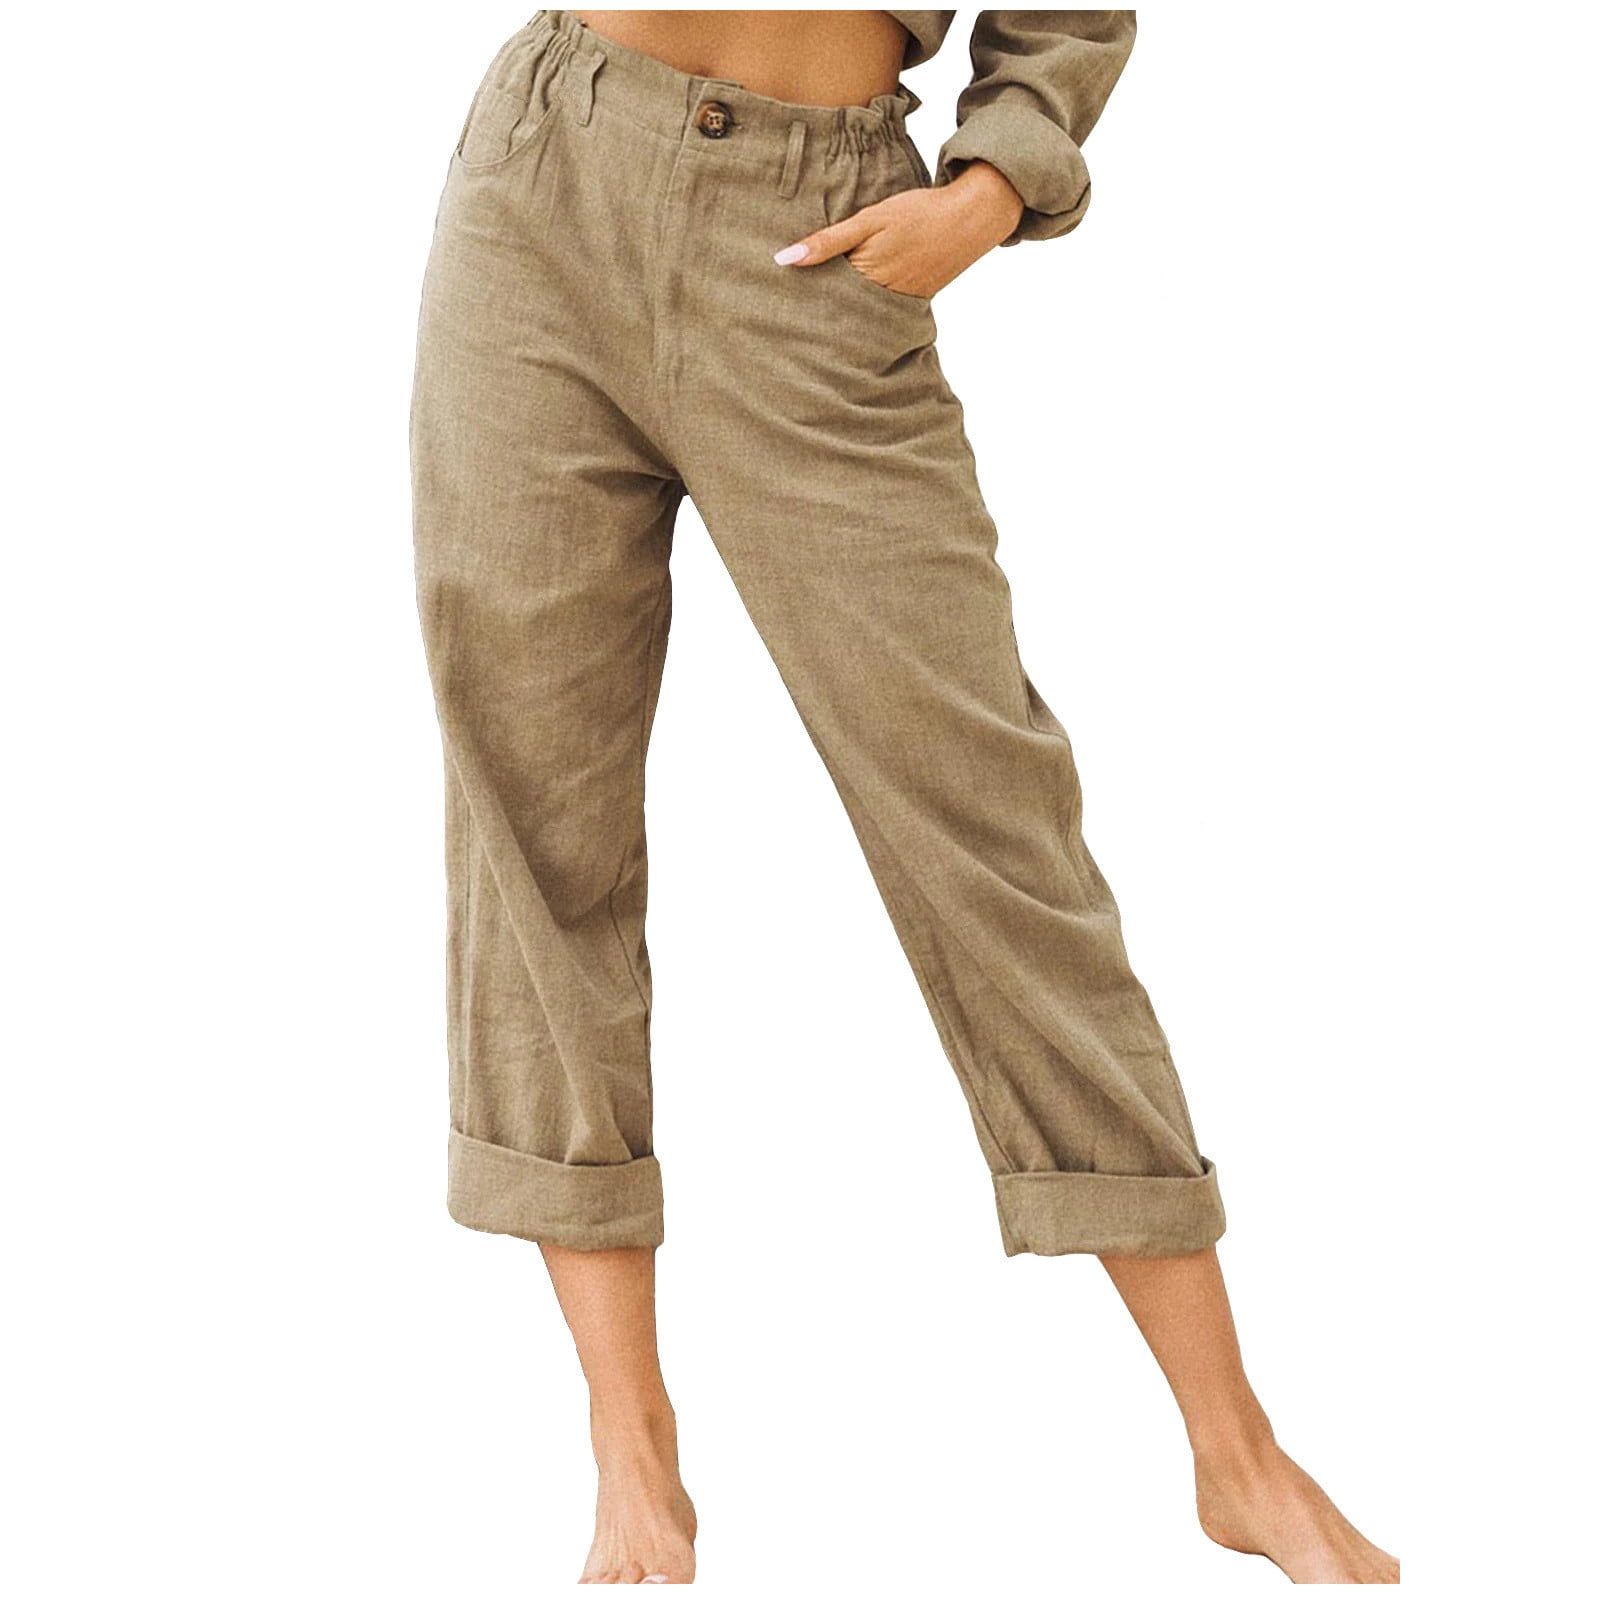 Frontwalk Womens Cotton Linen Loose Fit Casual Pants India